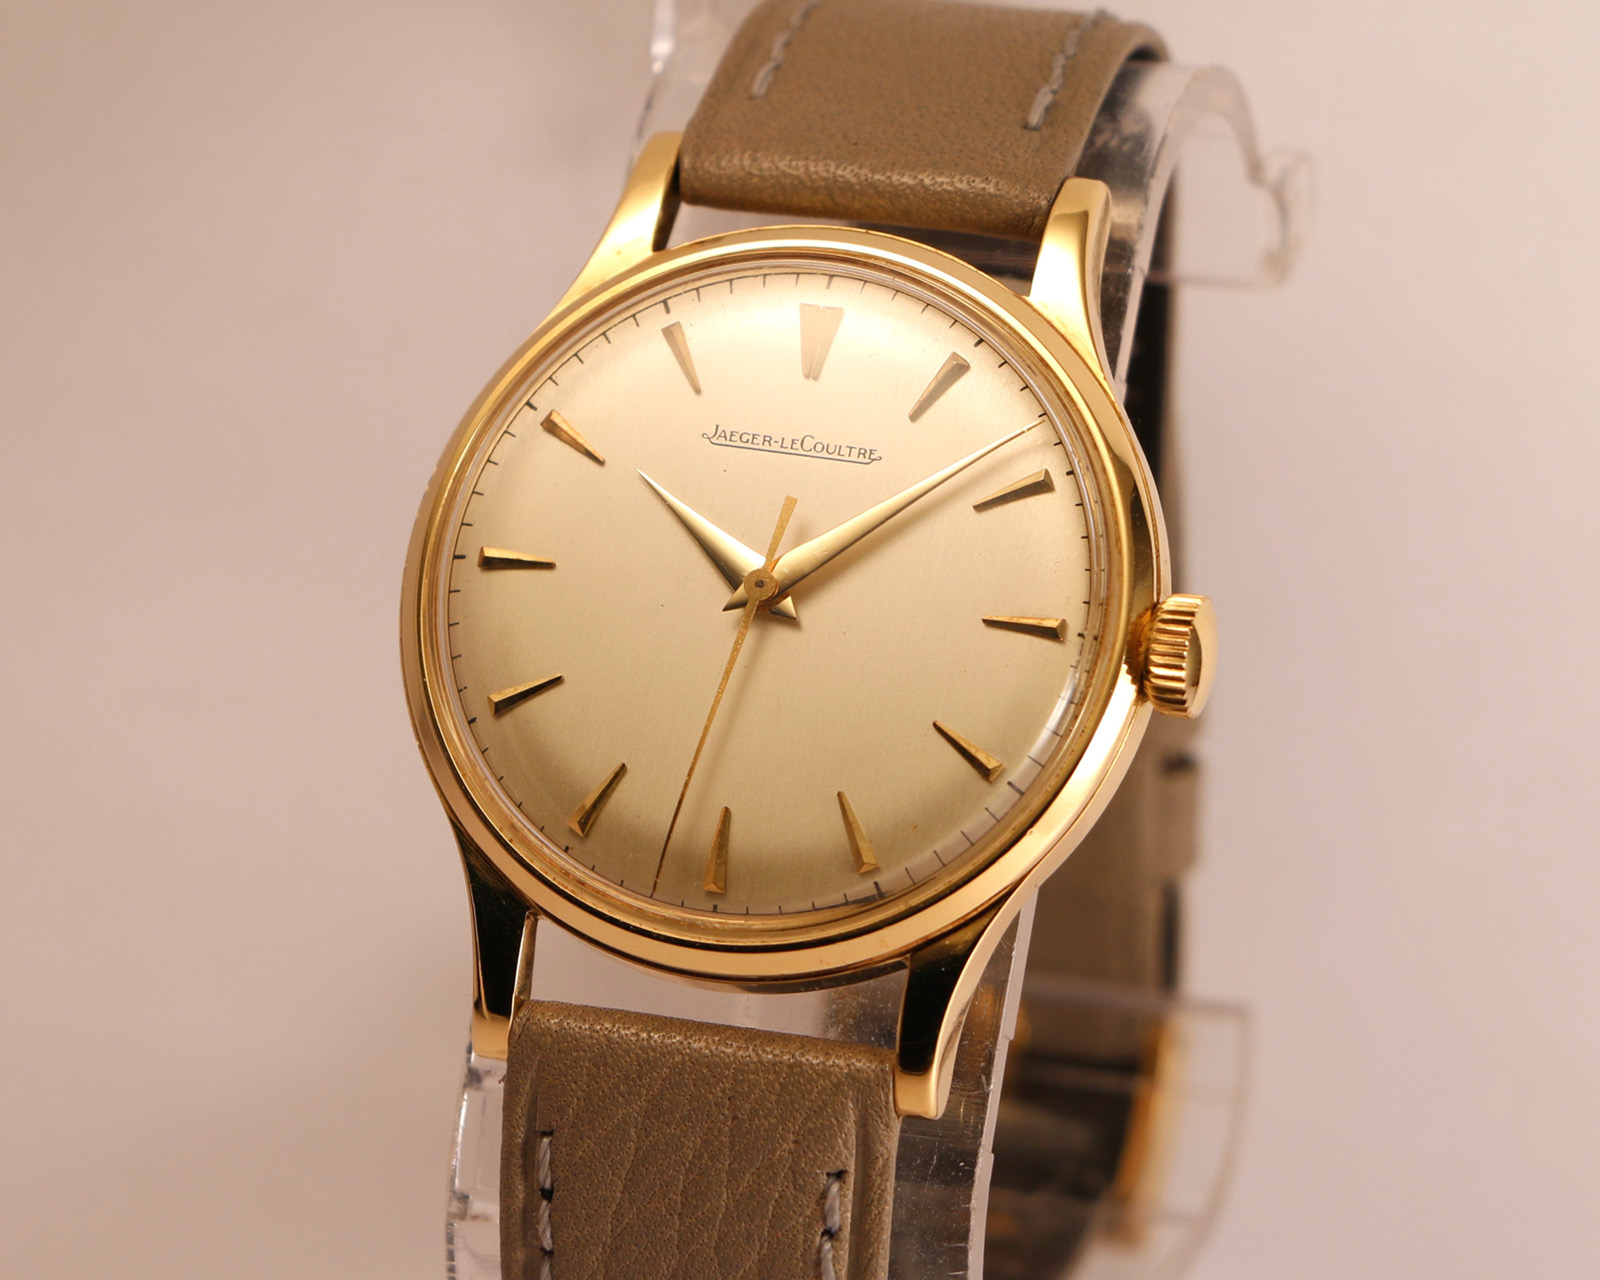 Jaeger-leCoultre 18K yellow gold beautiful condition fully serviced ...